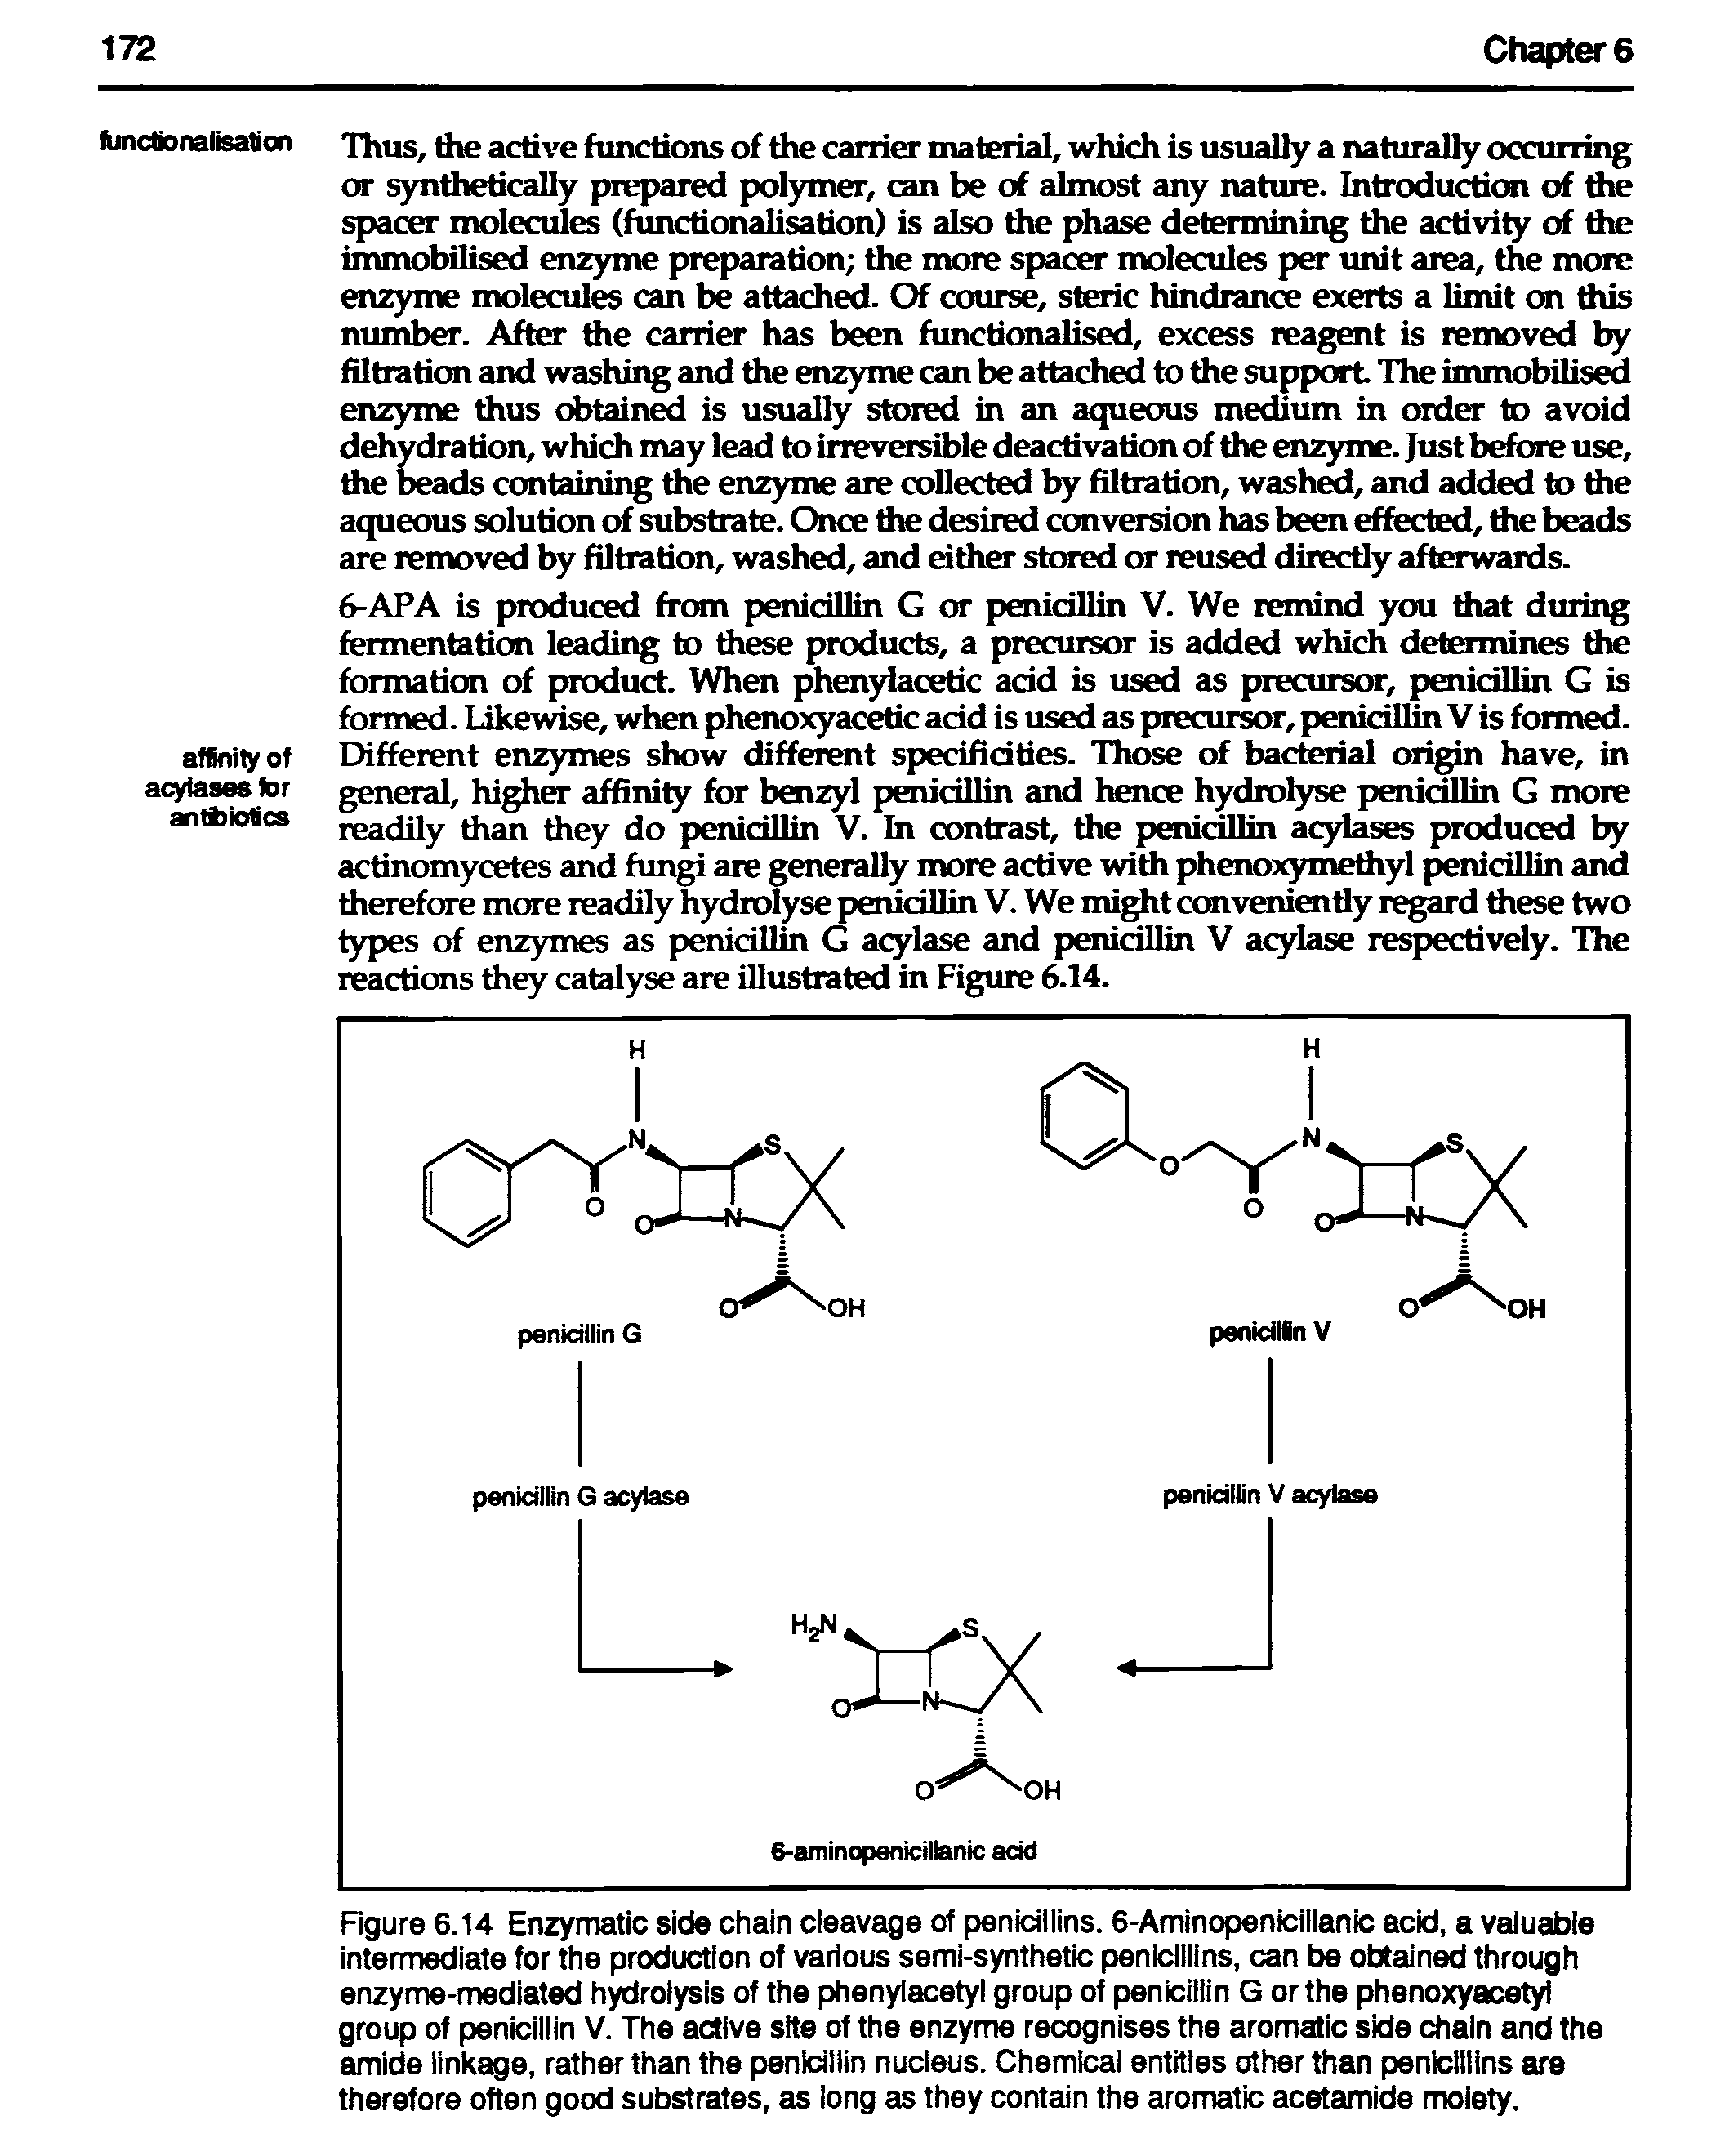 Figure 6.14 Enzymatic side chain cieavage of penidliins. 6-Aminopenicillanic acid, a vaiuabie intermediate for the production of various semi-synthetic penicillins, can be obtain through enzyme-mediated hydrolysis of the phenylacetyl group of penicillin G or the phenoxyacetyi group of penicillin V. The active site of the enzyme recognises the aromatic side chain and the amide linkage, rather than the penidllin nucleus. Chemical entities other than penicillins are therefore often good substrates, as long as they contain the aromatic acetamide moiety.